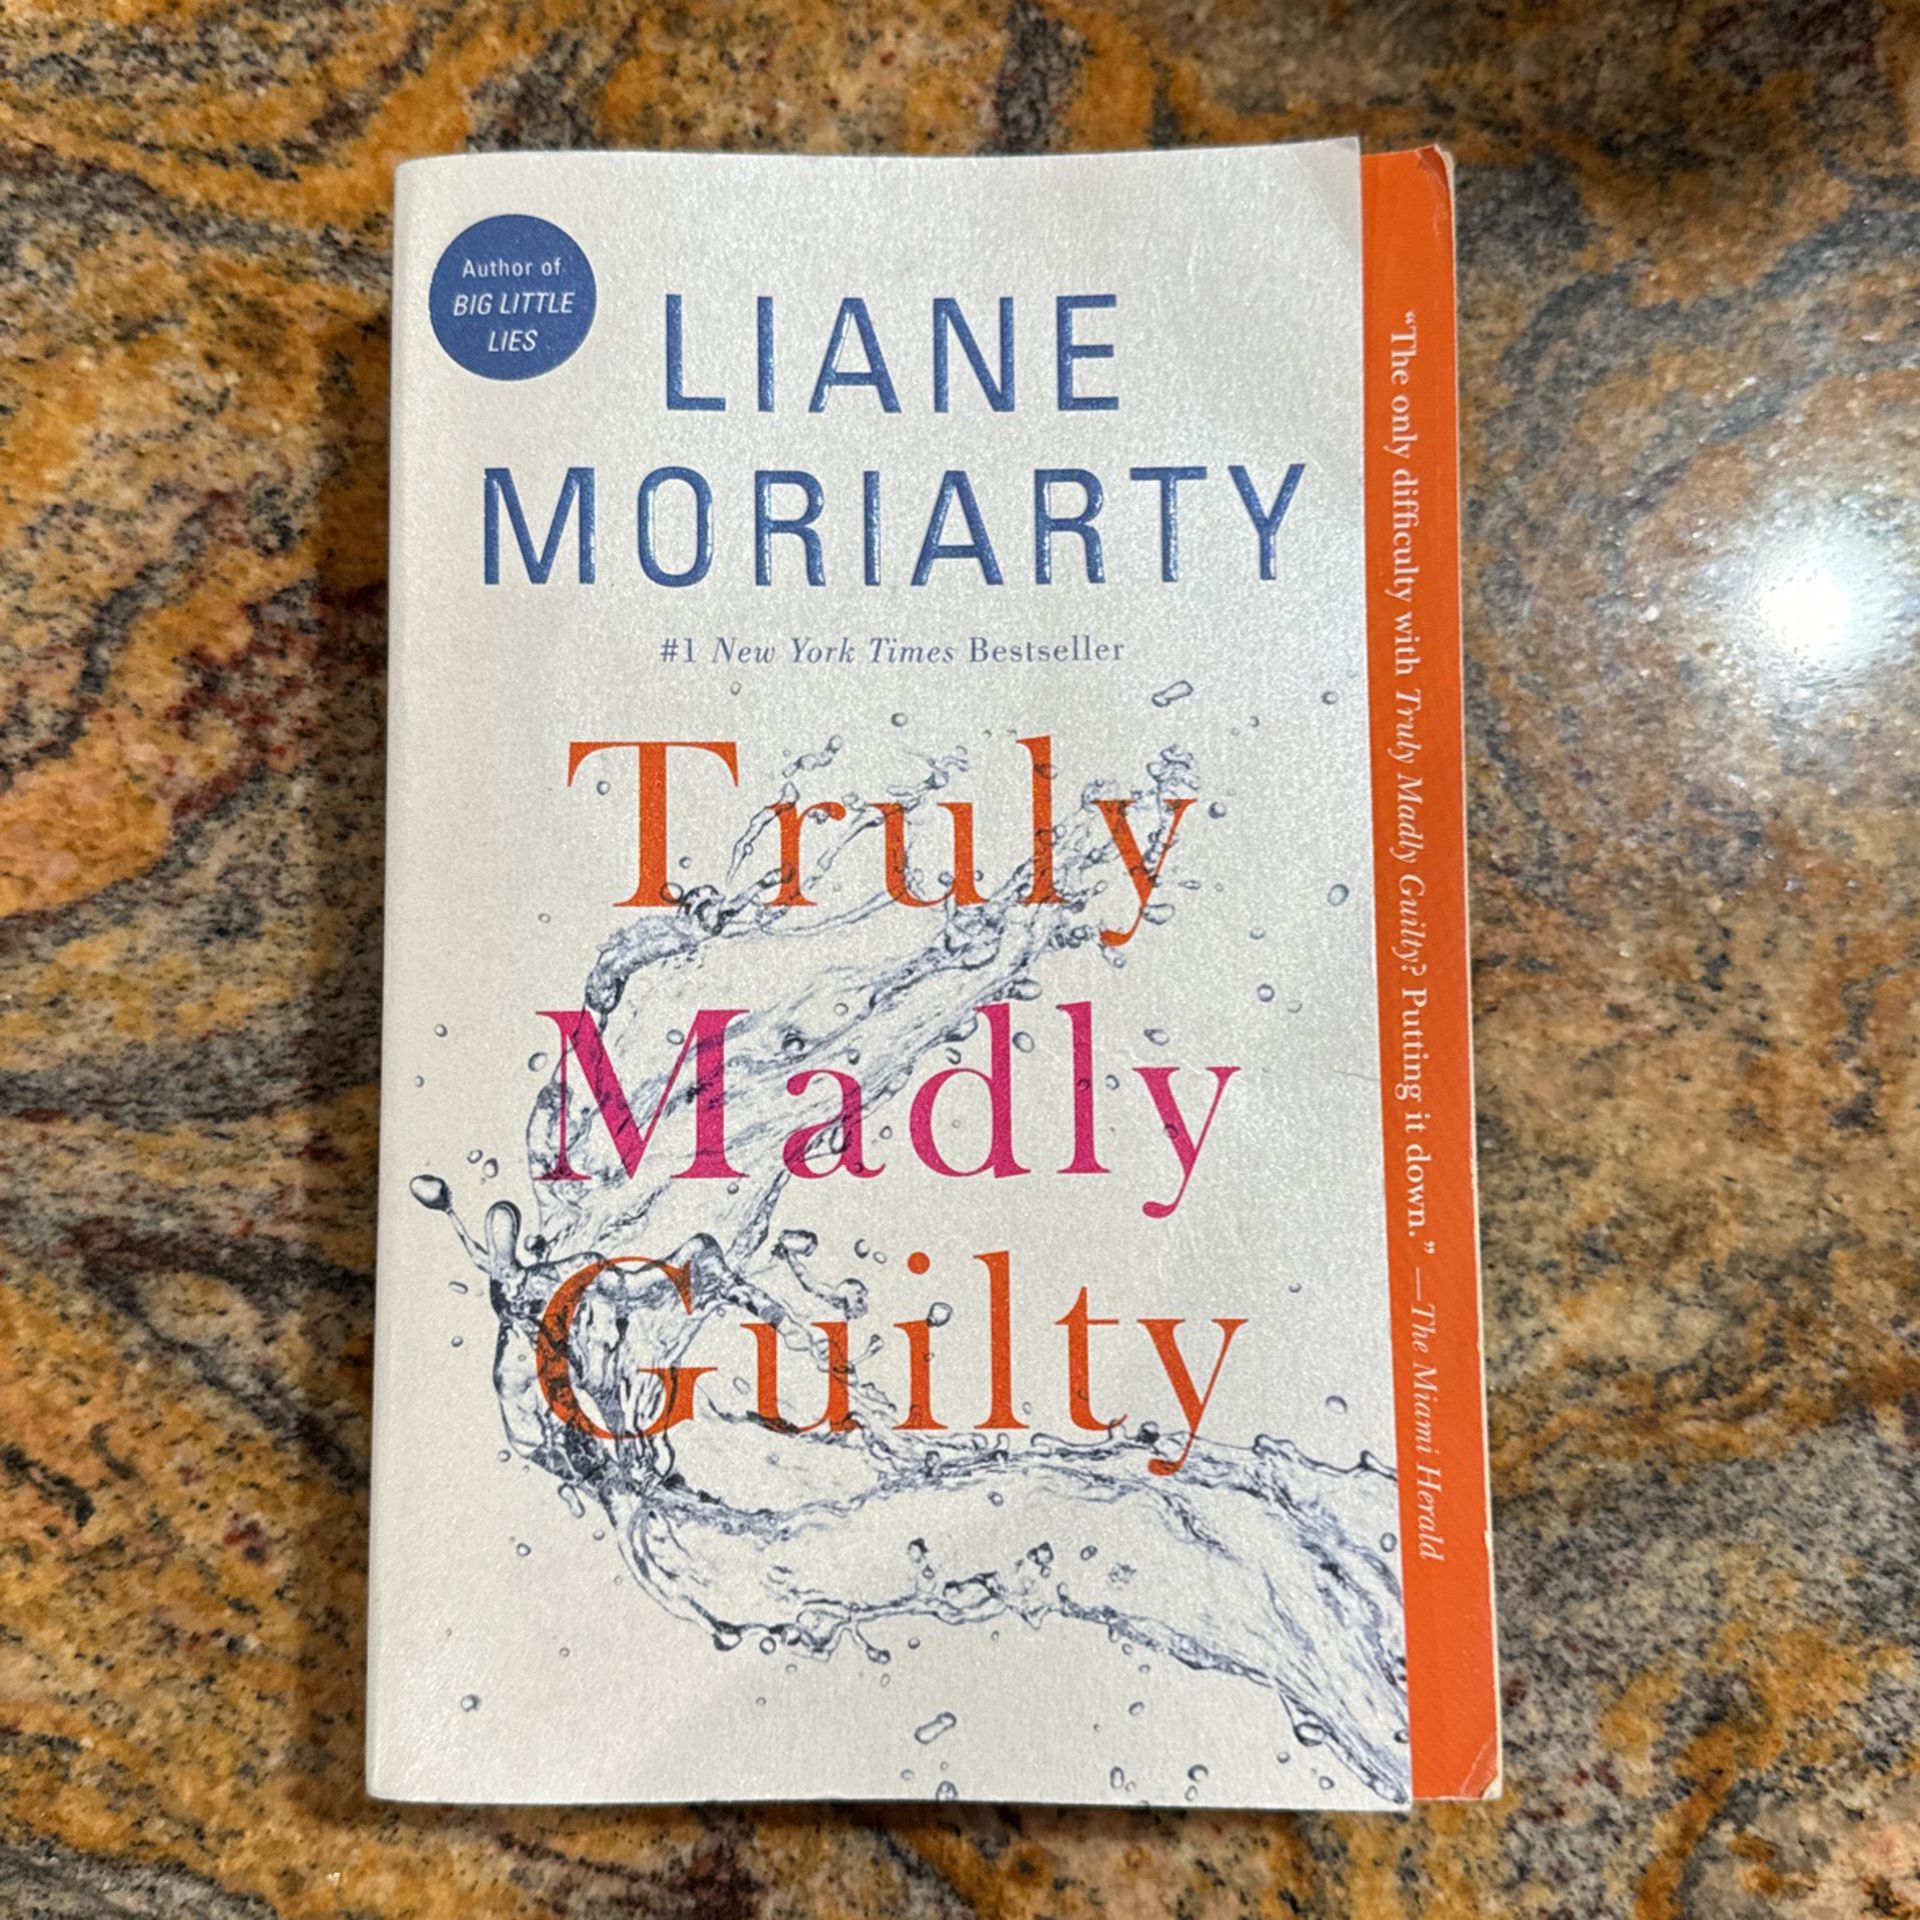 Truly Madly Guilty Book